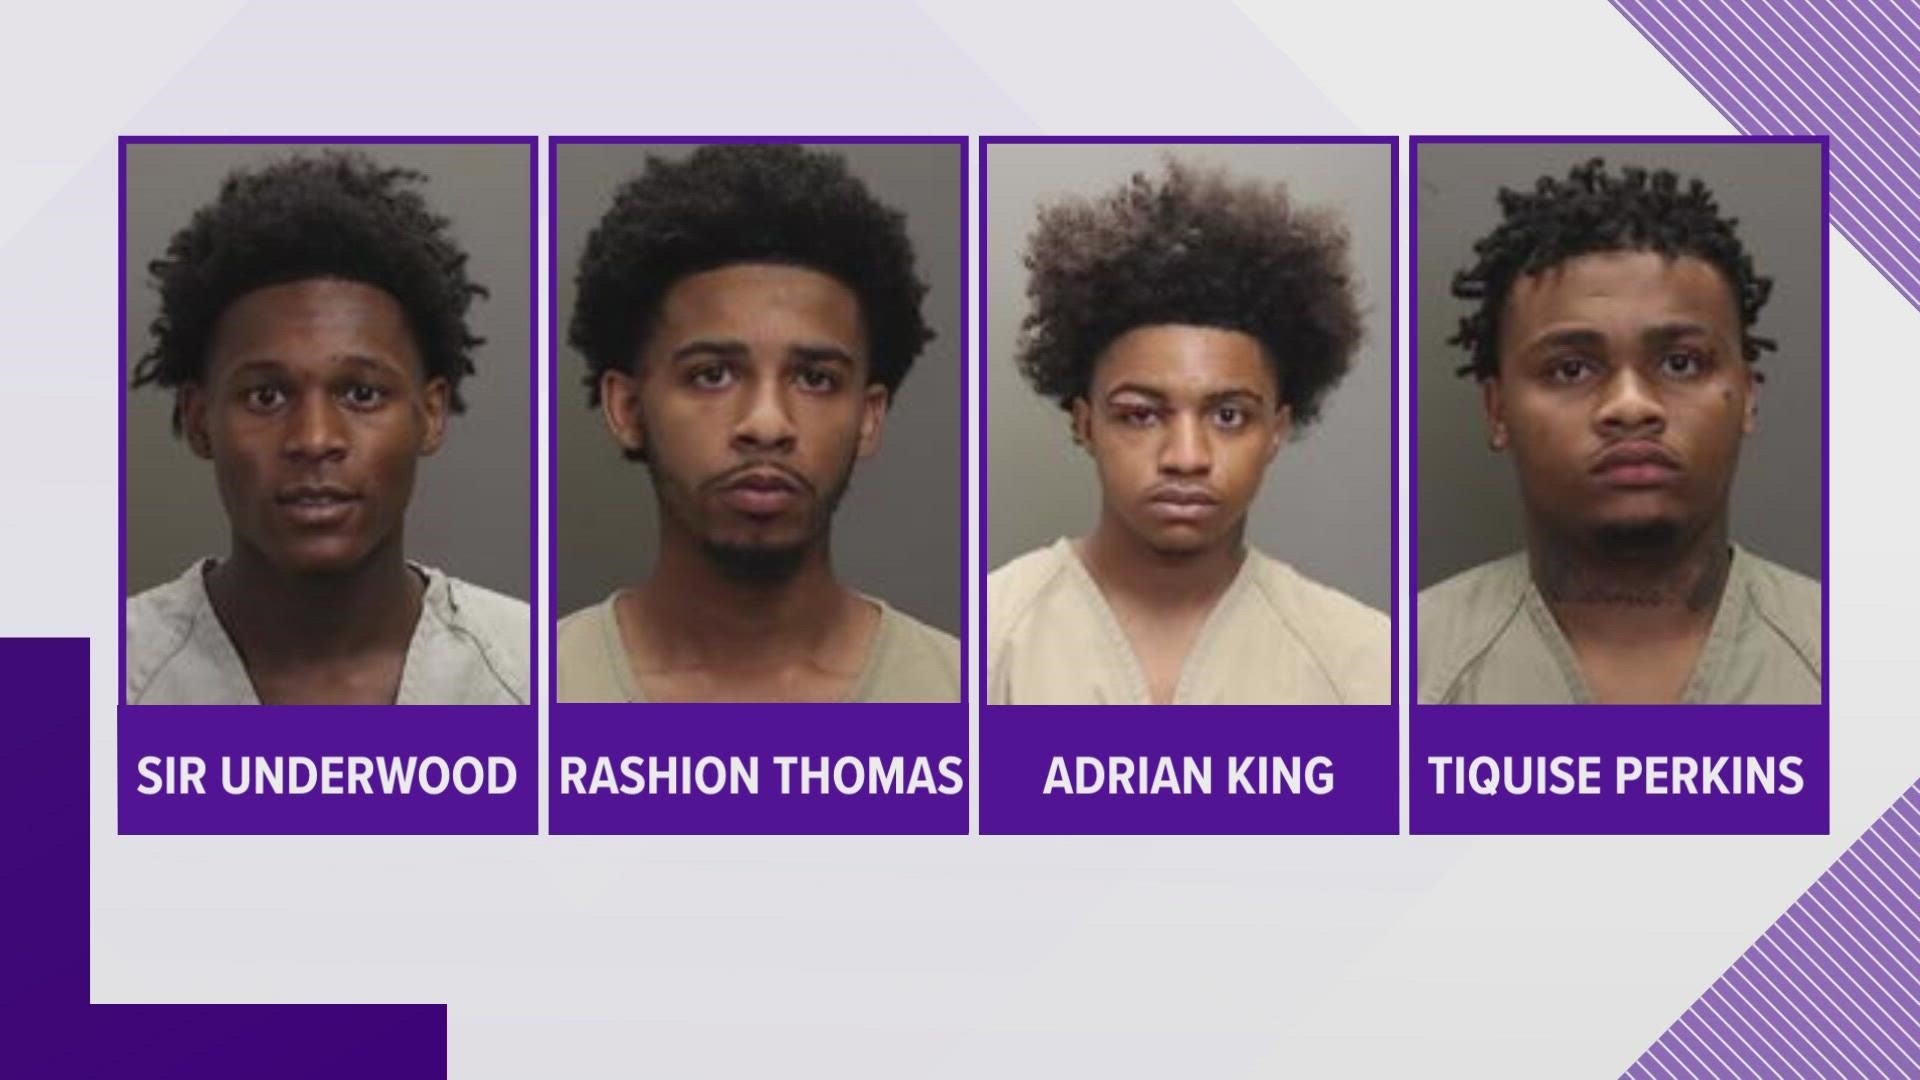 Police have charged 21-year-old Rashion Thomas and 18-year-olds Adrian King Jr., Tiquise Perkins and Sir Underwood with aggravated robbery.